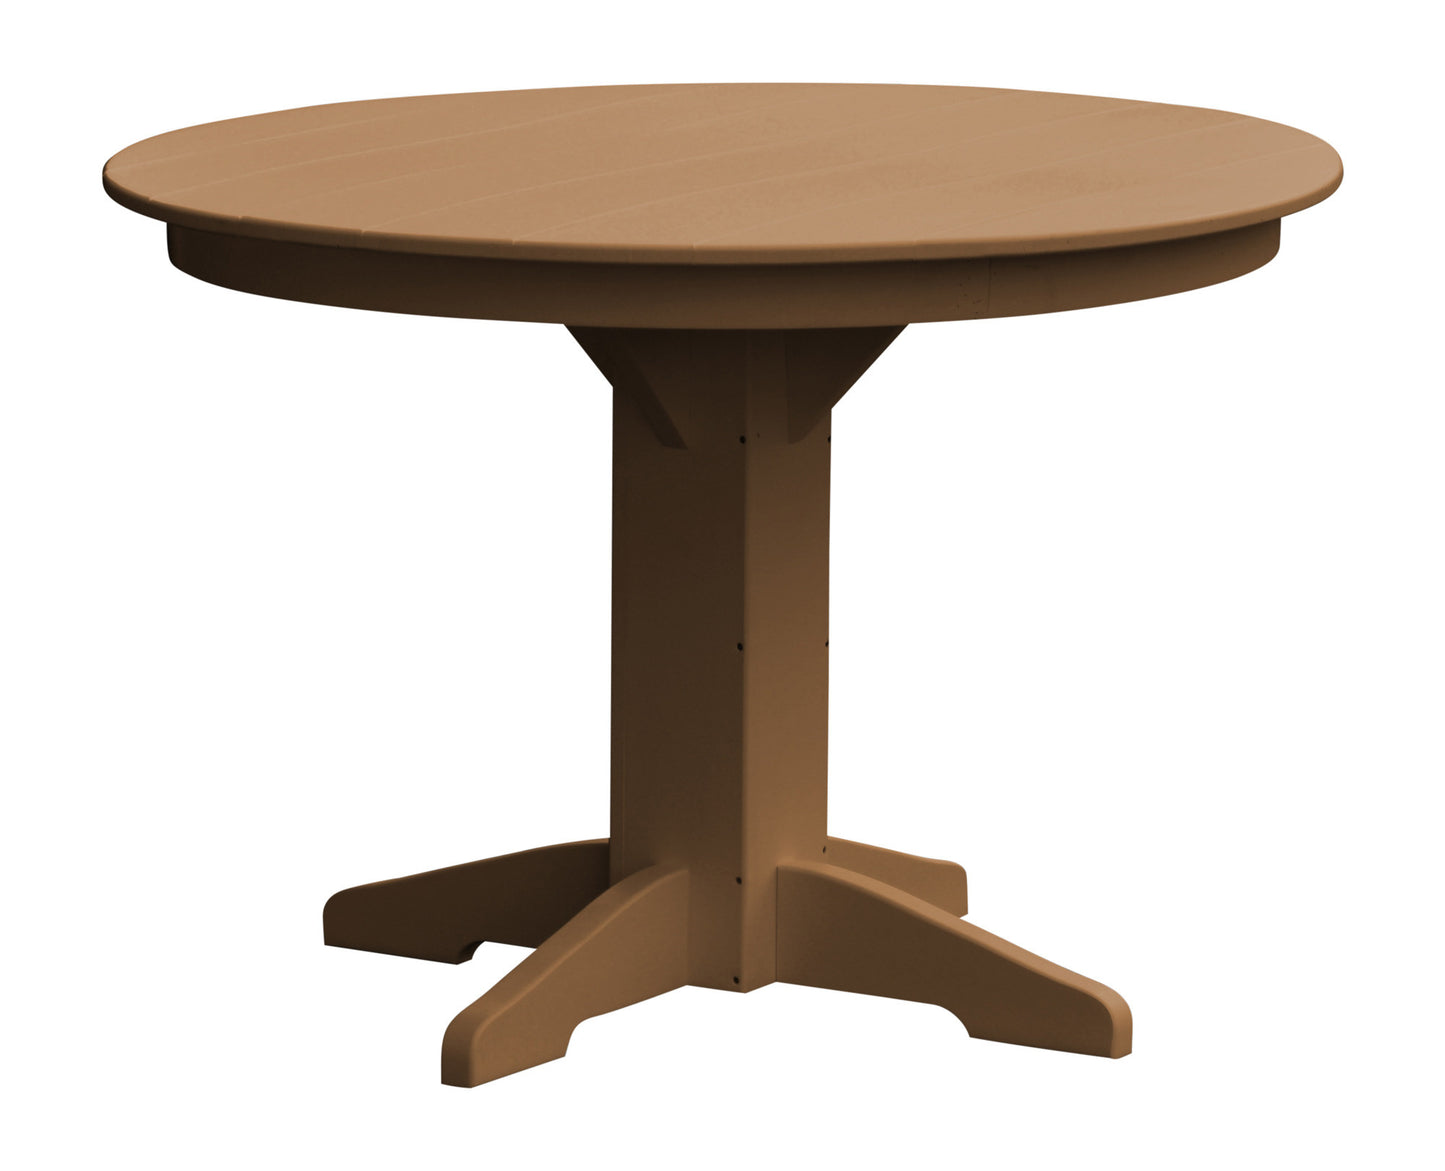 A&L Furniture Recycled Plastic 44" Round Dining Table - Cedar